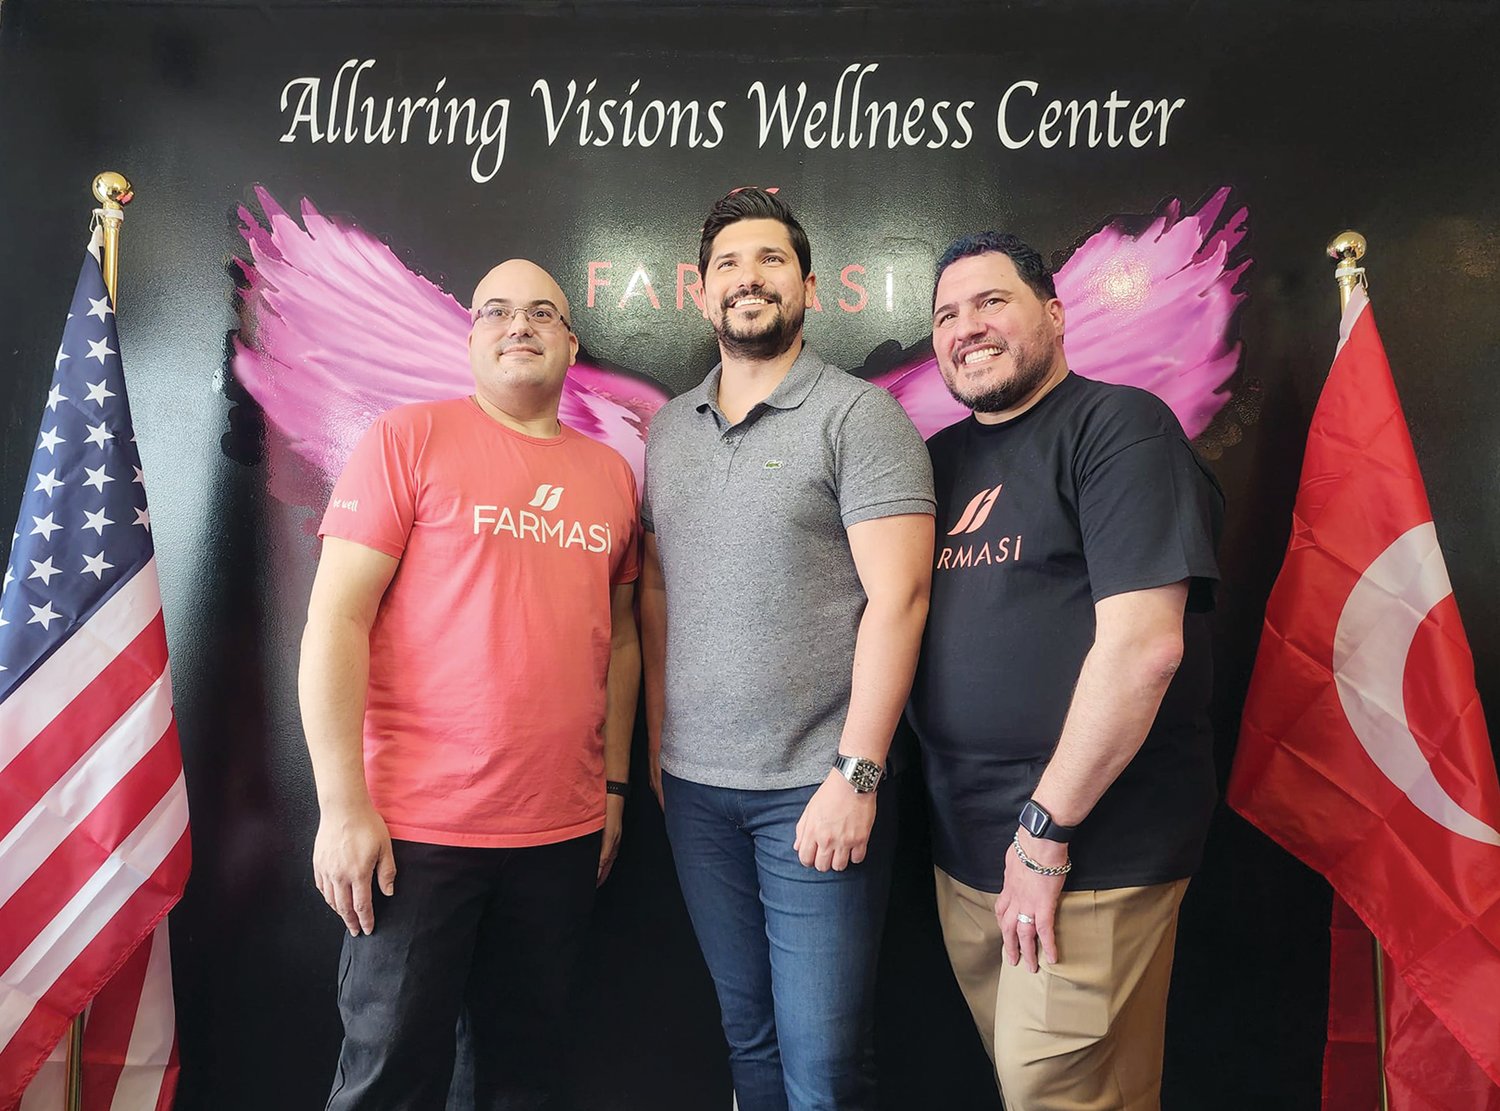 Meet Wayne (l) & Michael Medeiros (r), the owners of Alluring Visions Wellness Center, the only retail store in the USA which sells the internationally-known FARMASI products.  They are seen here flanking the grandson of FARMASI’s founder, Emre Tuna.